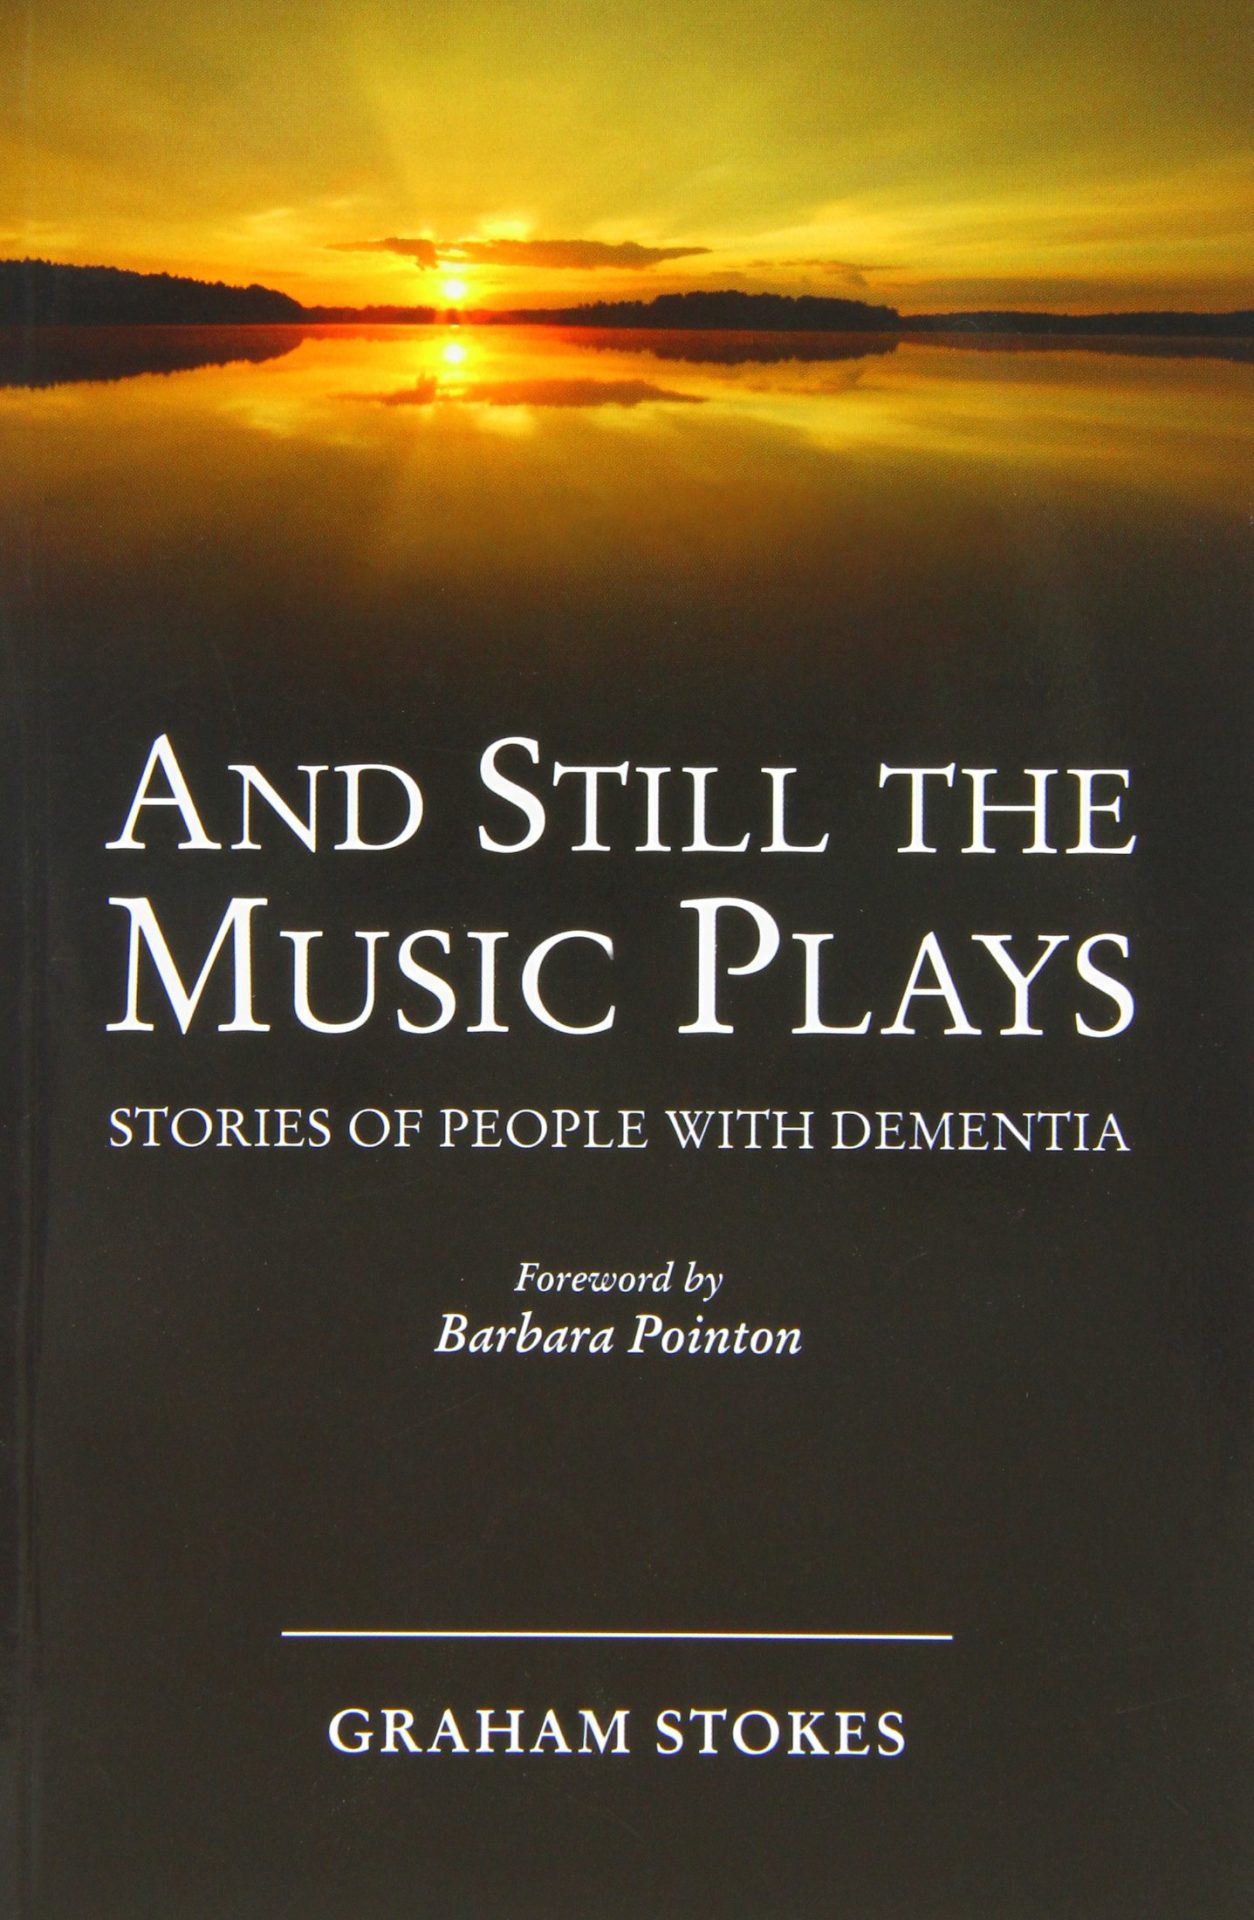 And Still the Music Plays: Stories of People with Dementia